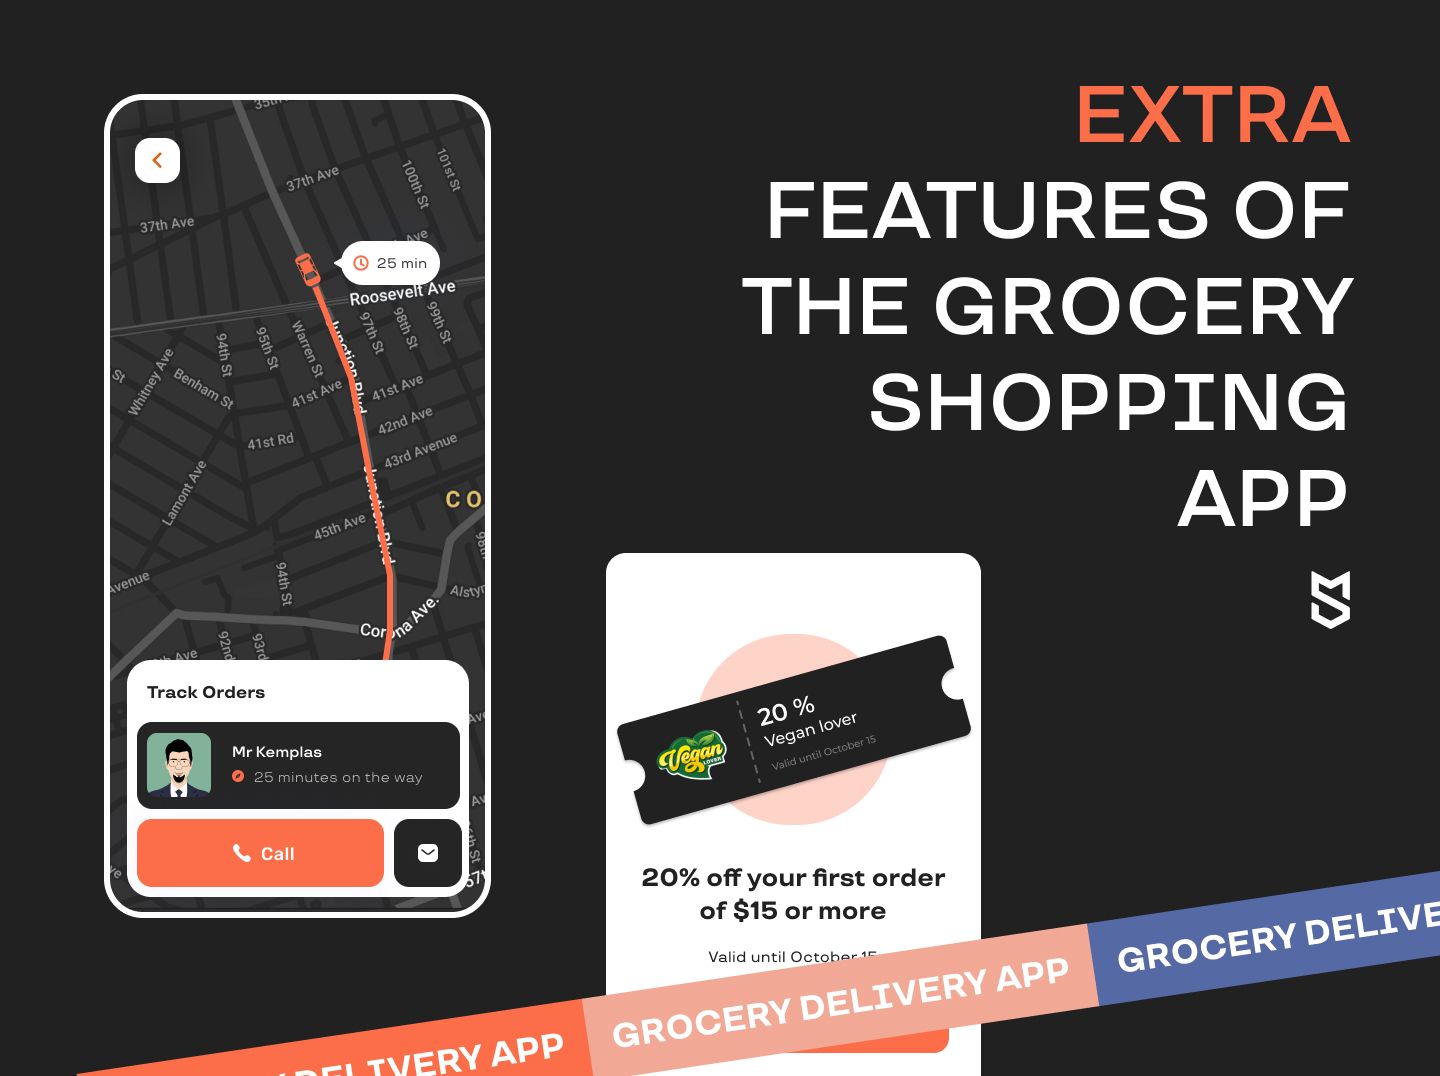 Extra features of the grocery shopping app